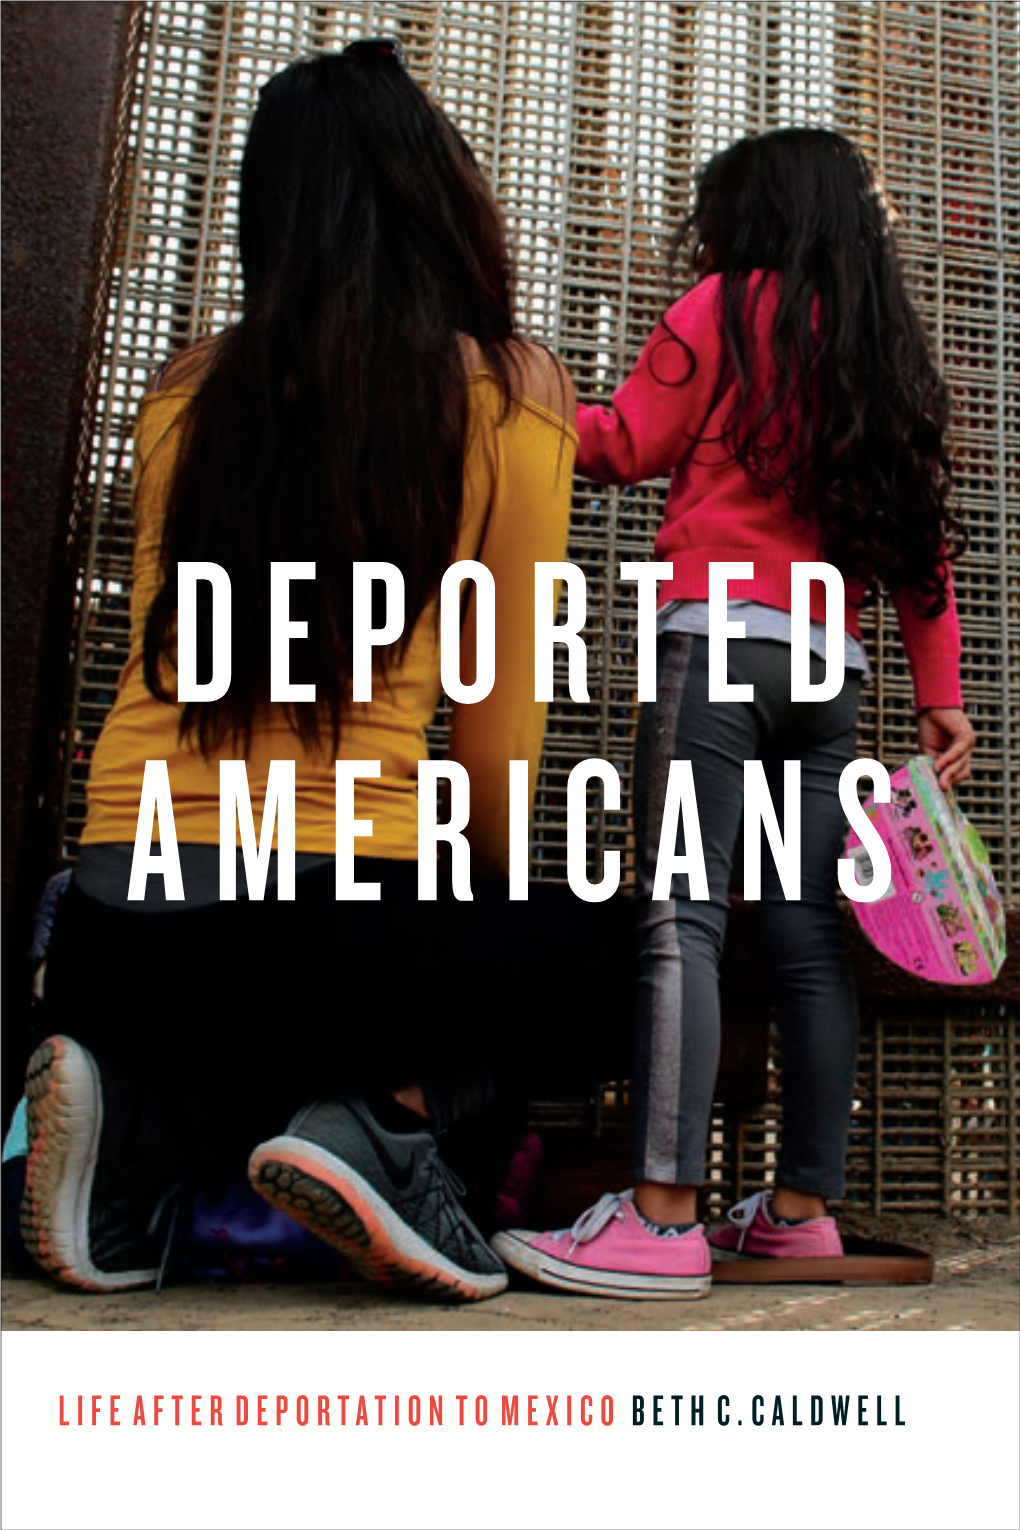 Life After Deportation to Mexico Beth C. Caldwell Deported Americans